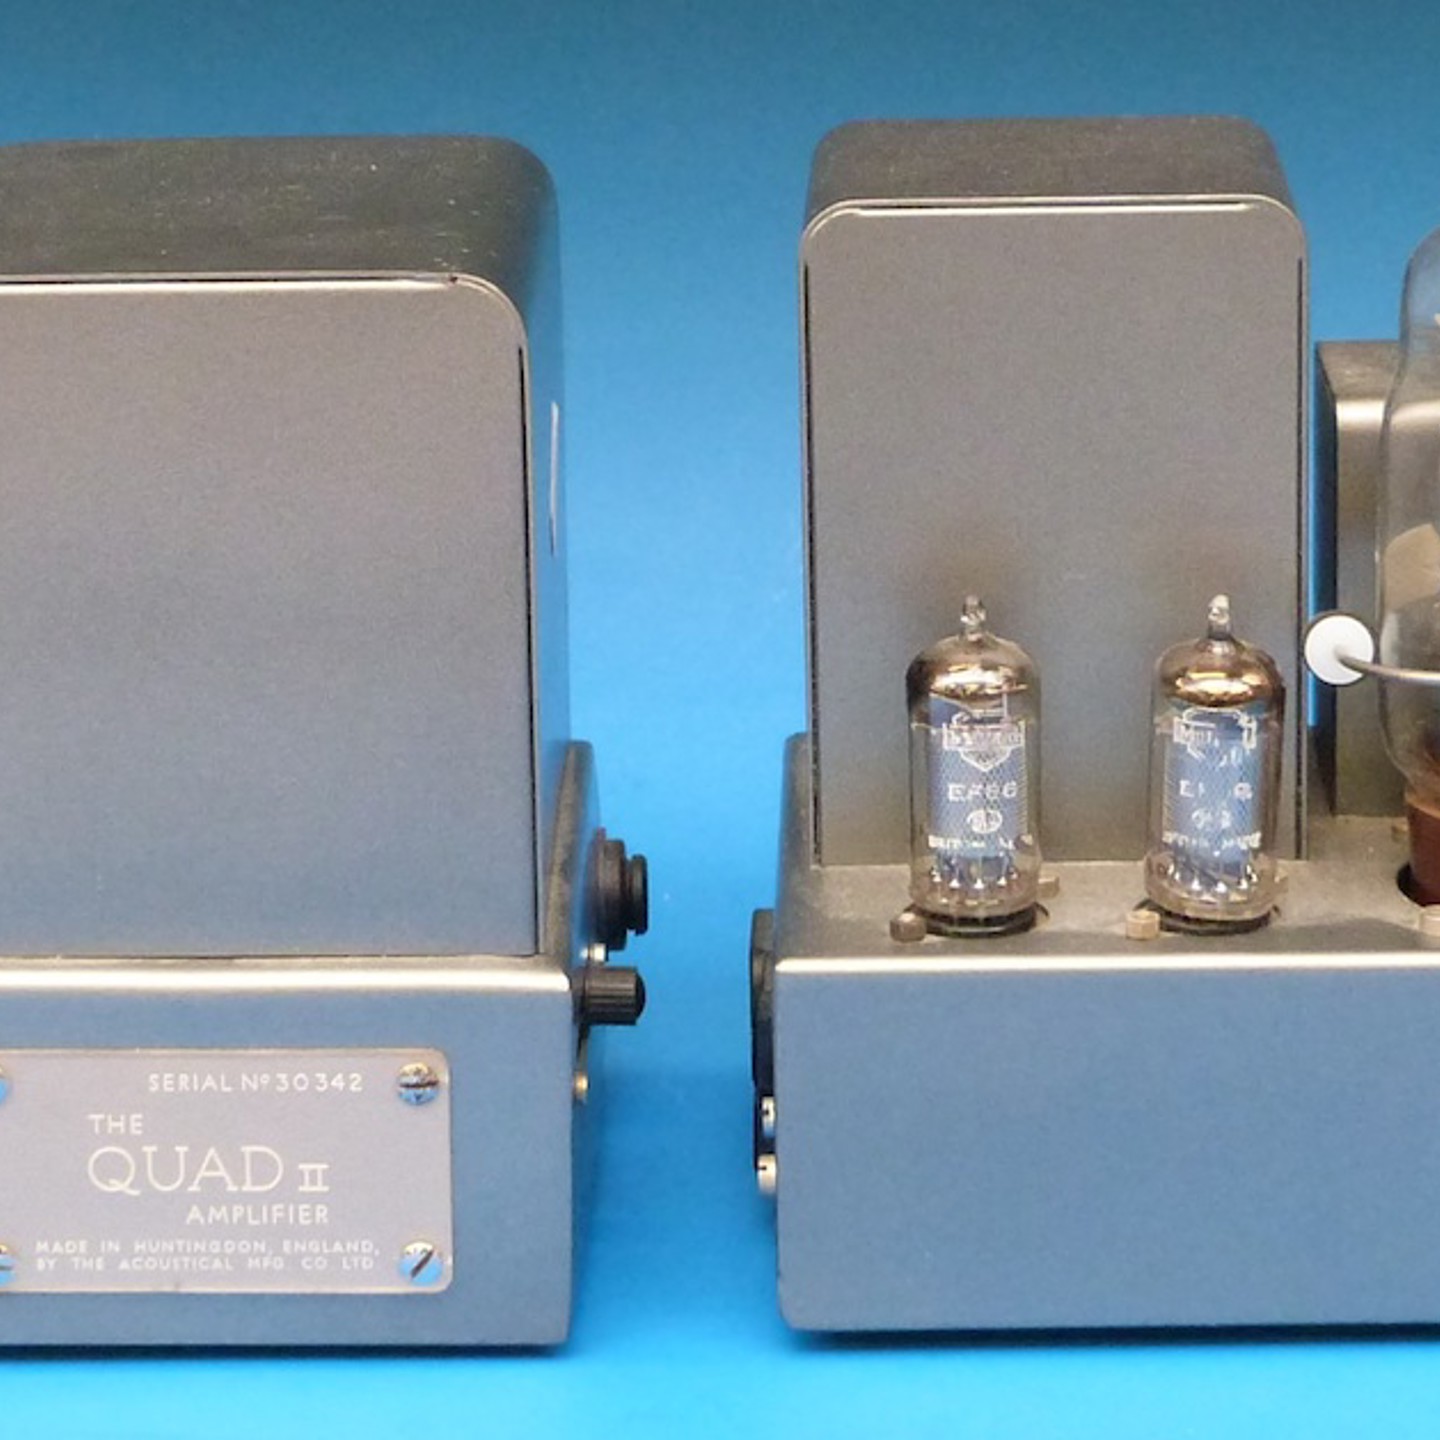 A Pair Of Quad II Amplifiers By The Acoustical MFG Co Sold Ś1,000